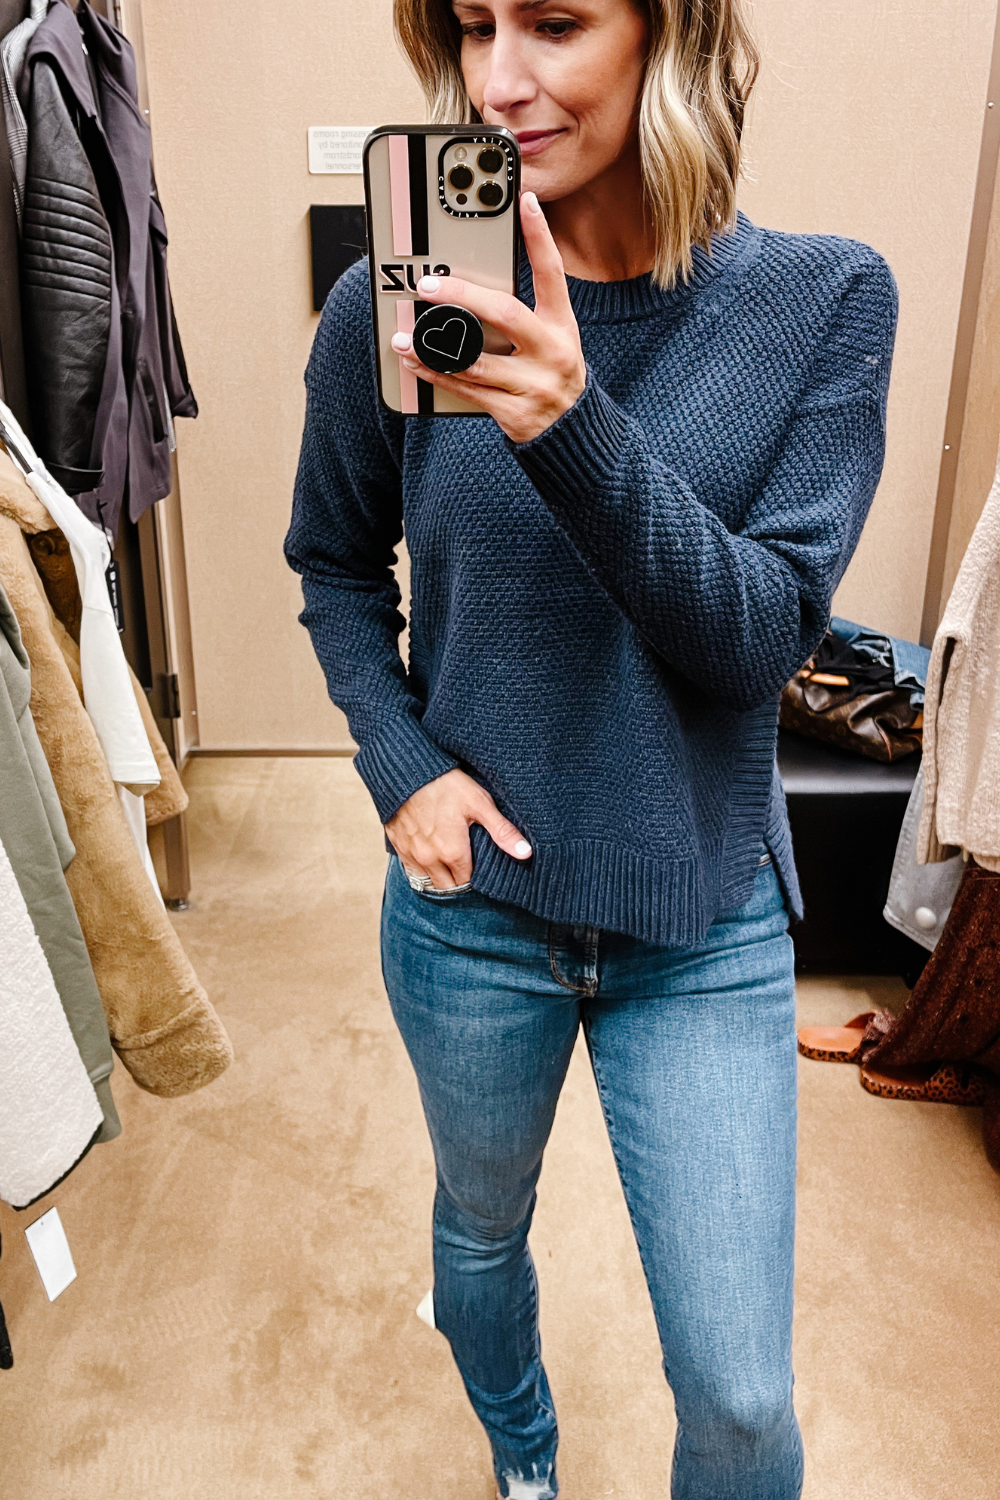 NORDSTROM ANNIVERSARY SALE: Madewell sweater and skinny jeans